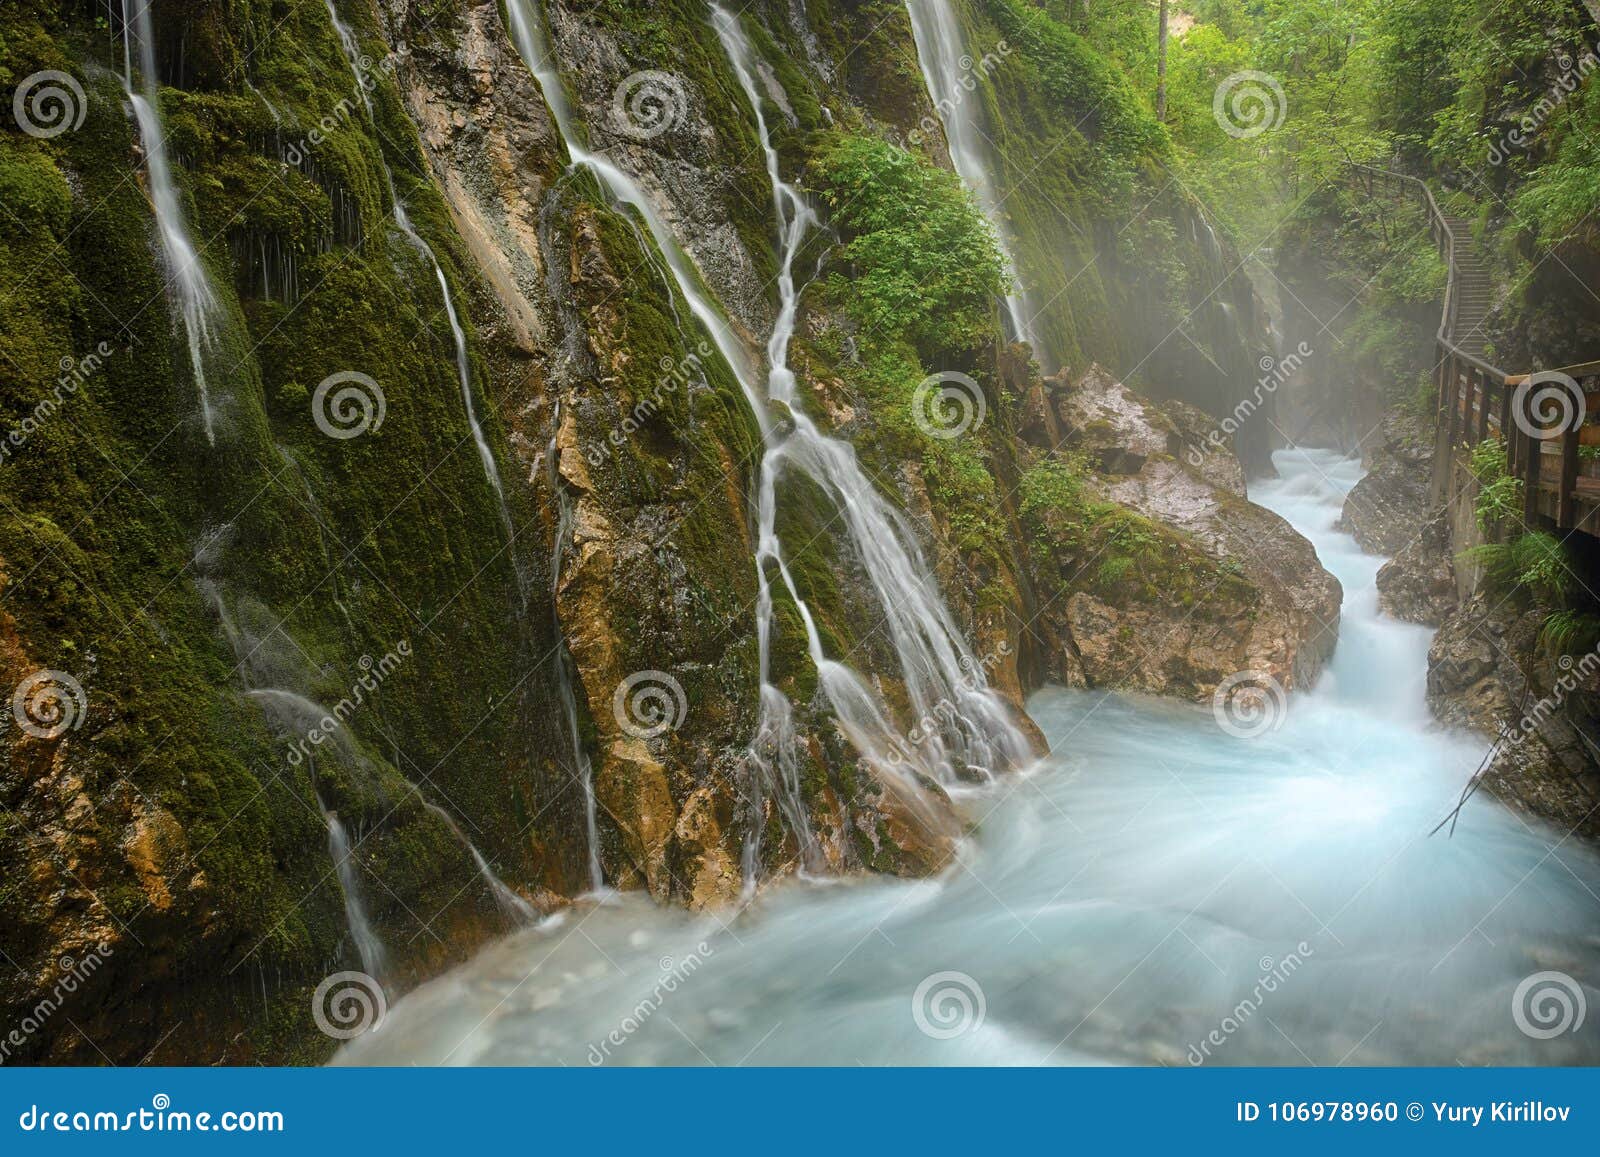 wimbach creek and waterfalls in germany